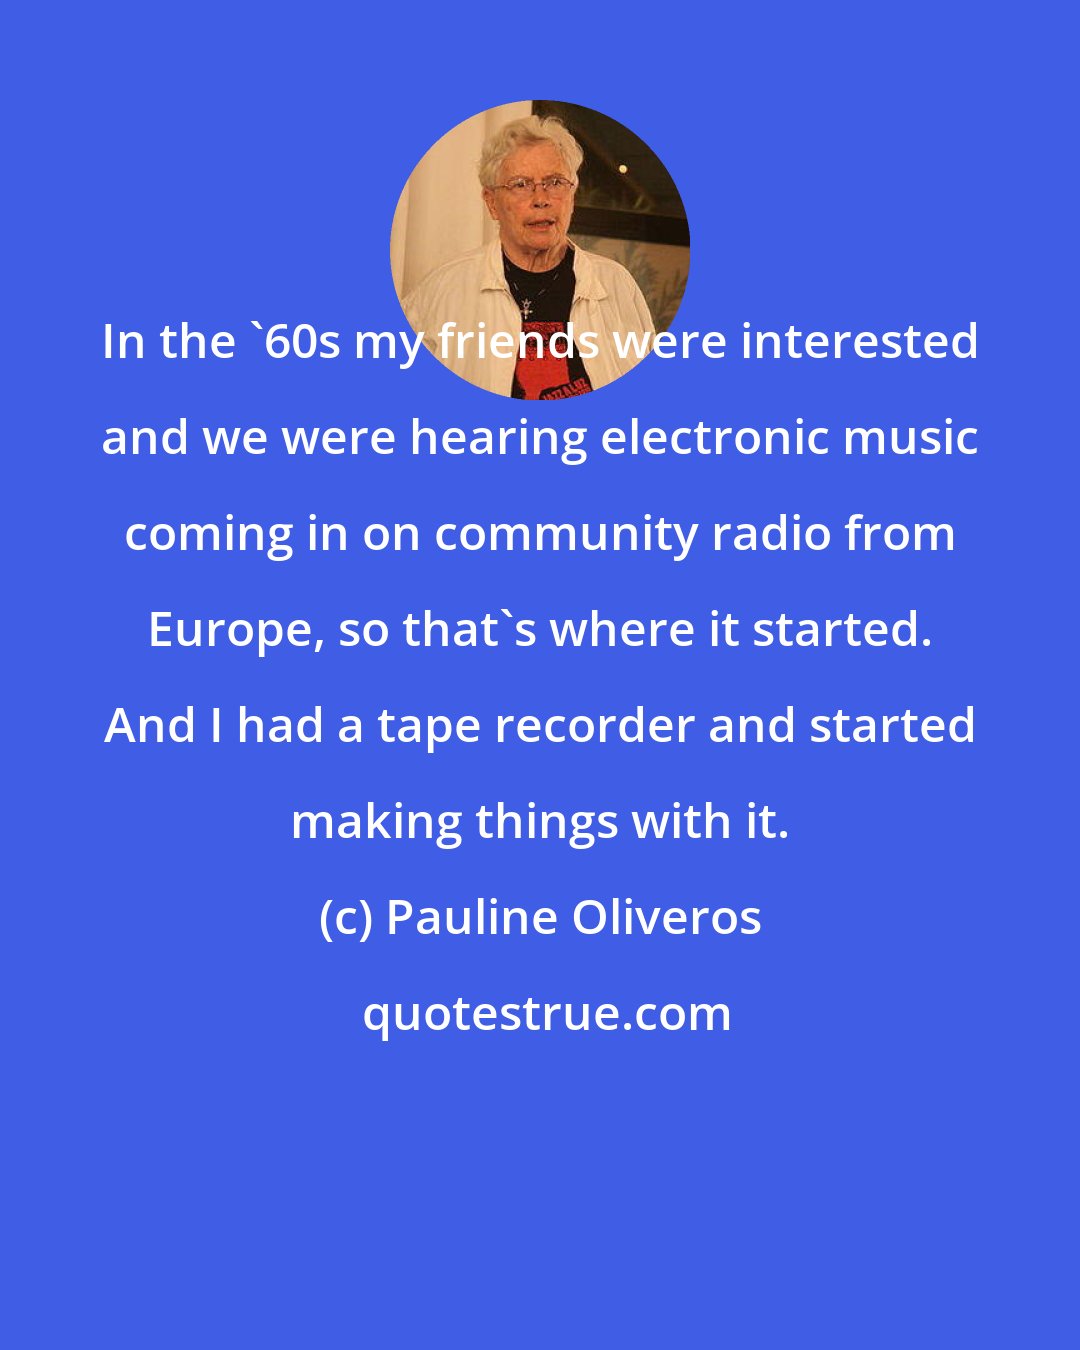 Pauline Oliveros: In the '60s my friends were interested and we were hearing electronic music coming in on community radio from Europe, so that's where it started. And I had a tape recorder and started making things with it.